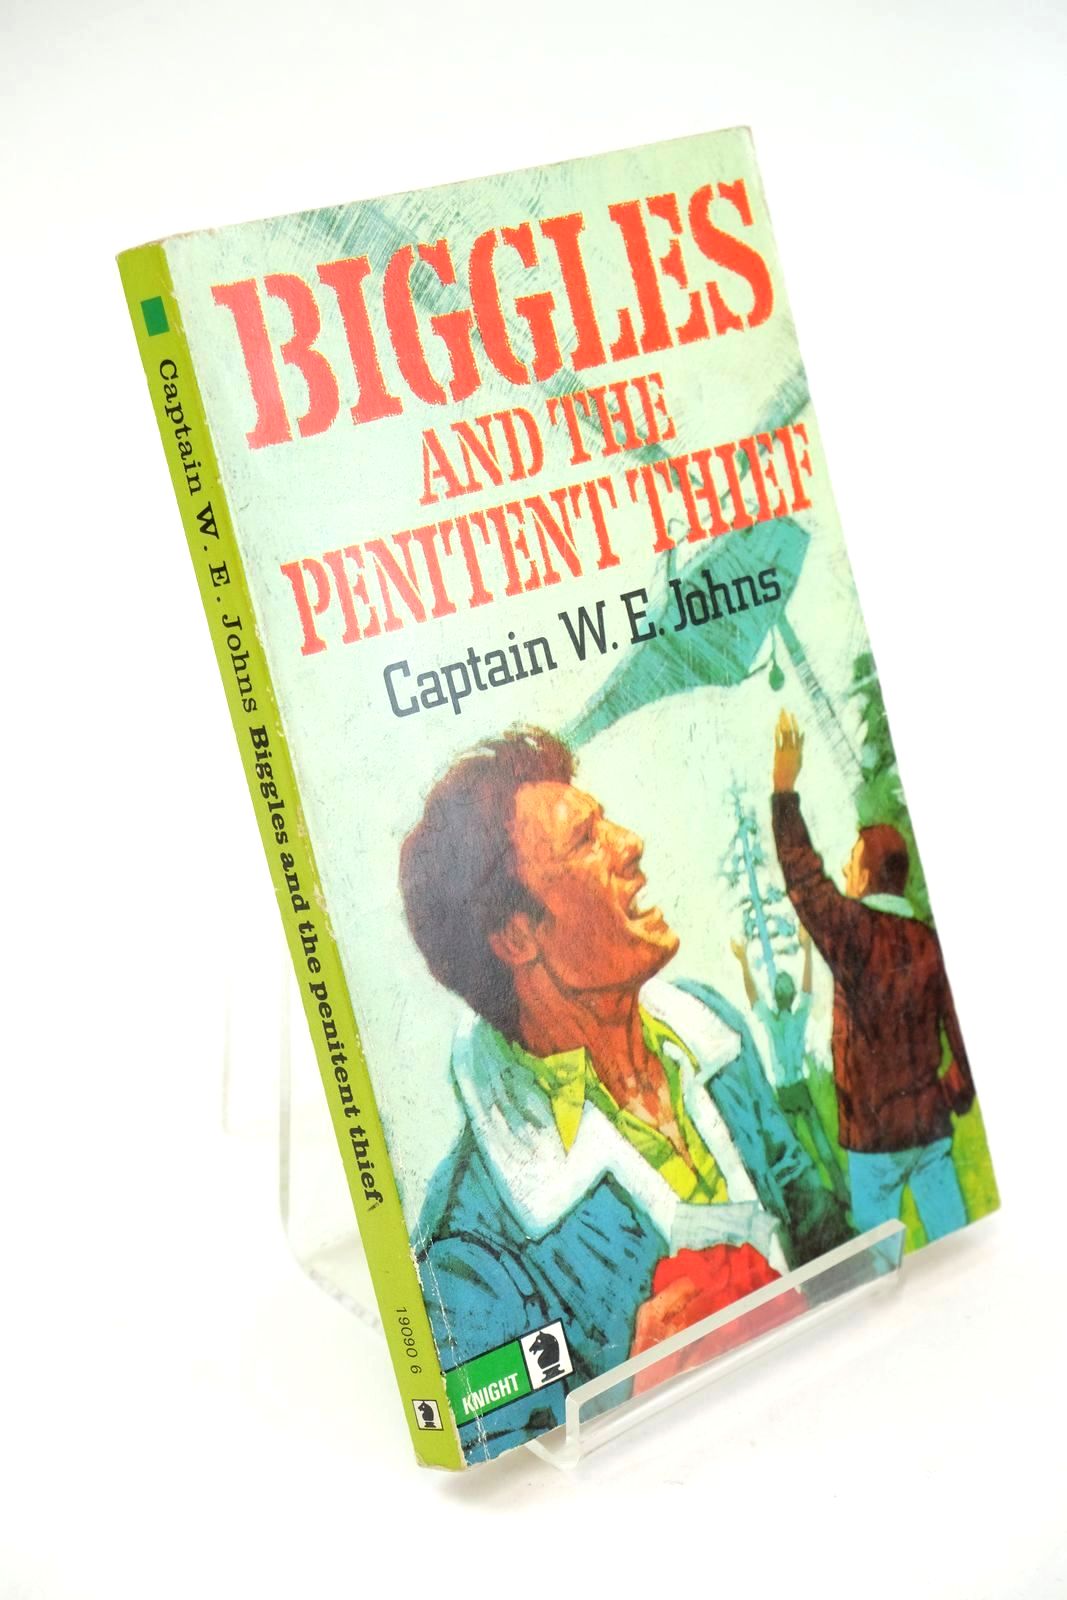 Photo of BIGGLES AND THE PENITENT THIEF written by Johns, W.E. published by Knight Books (STOCK CODE: 1324851)  for sale by Stella & Rose's Books